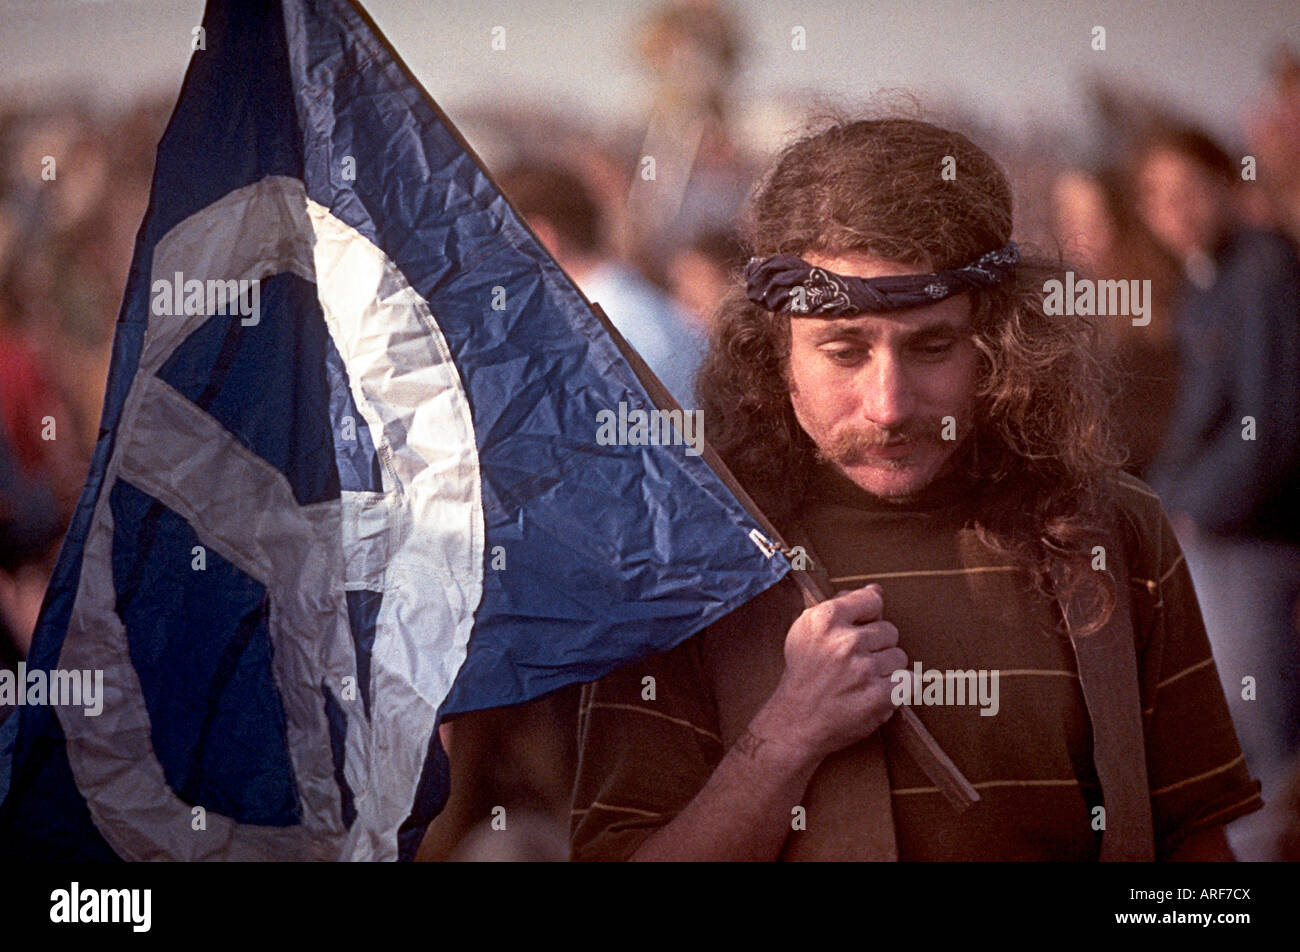 Concert goer with peace flag Free Rolling Stones concert at Altamont Speedway December 1969 Stock Photo